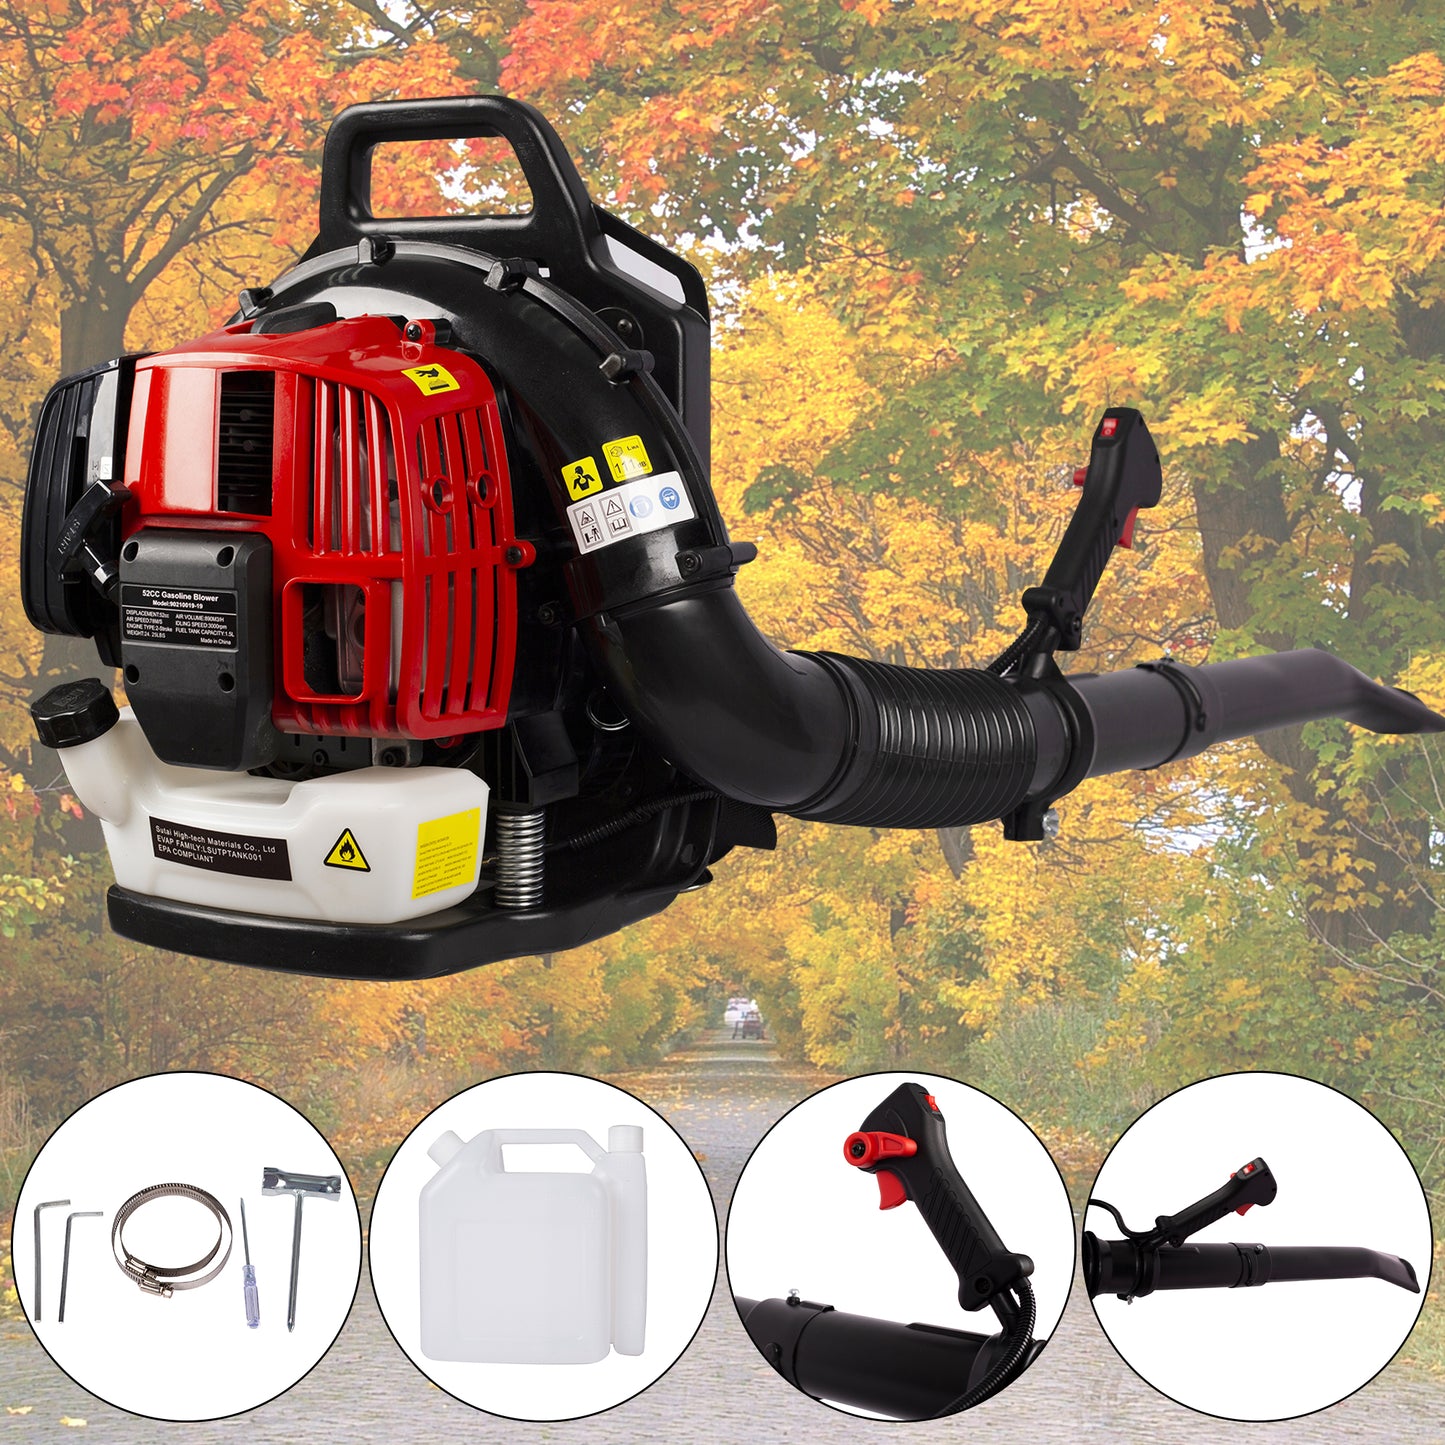 SYNGAR Gas Backpack Leaf Blower, 52CC 2-Cycle Leaf Blower Snow Blower with Extended Tube for Lawn Care Yard Snow Blowing Dust, Black & Red